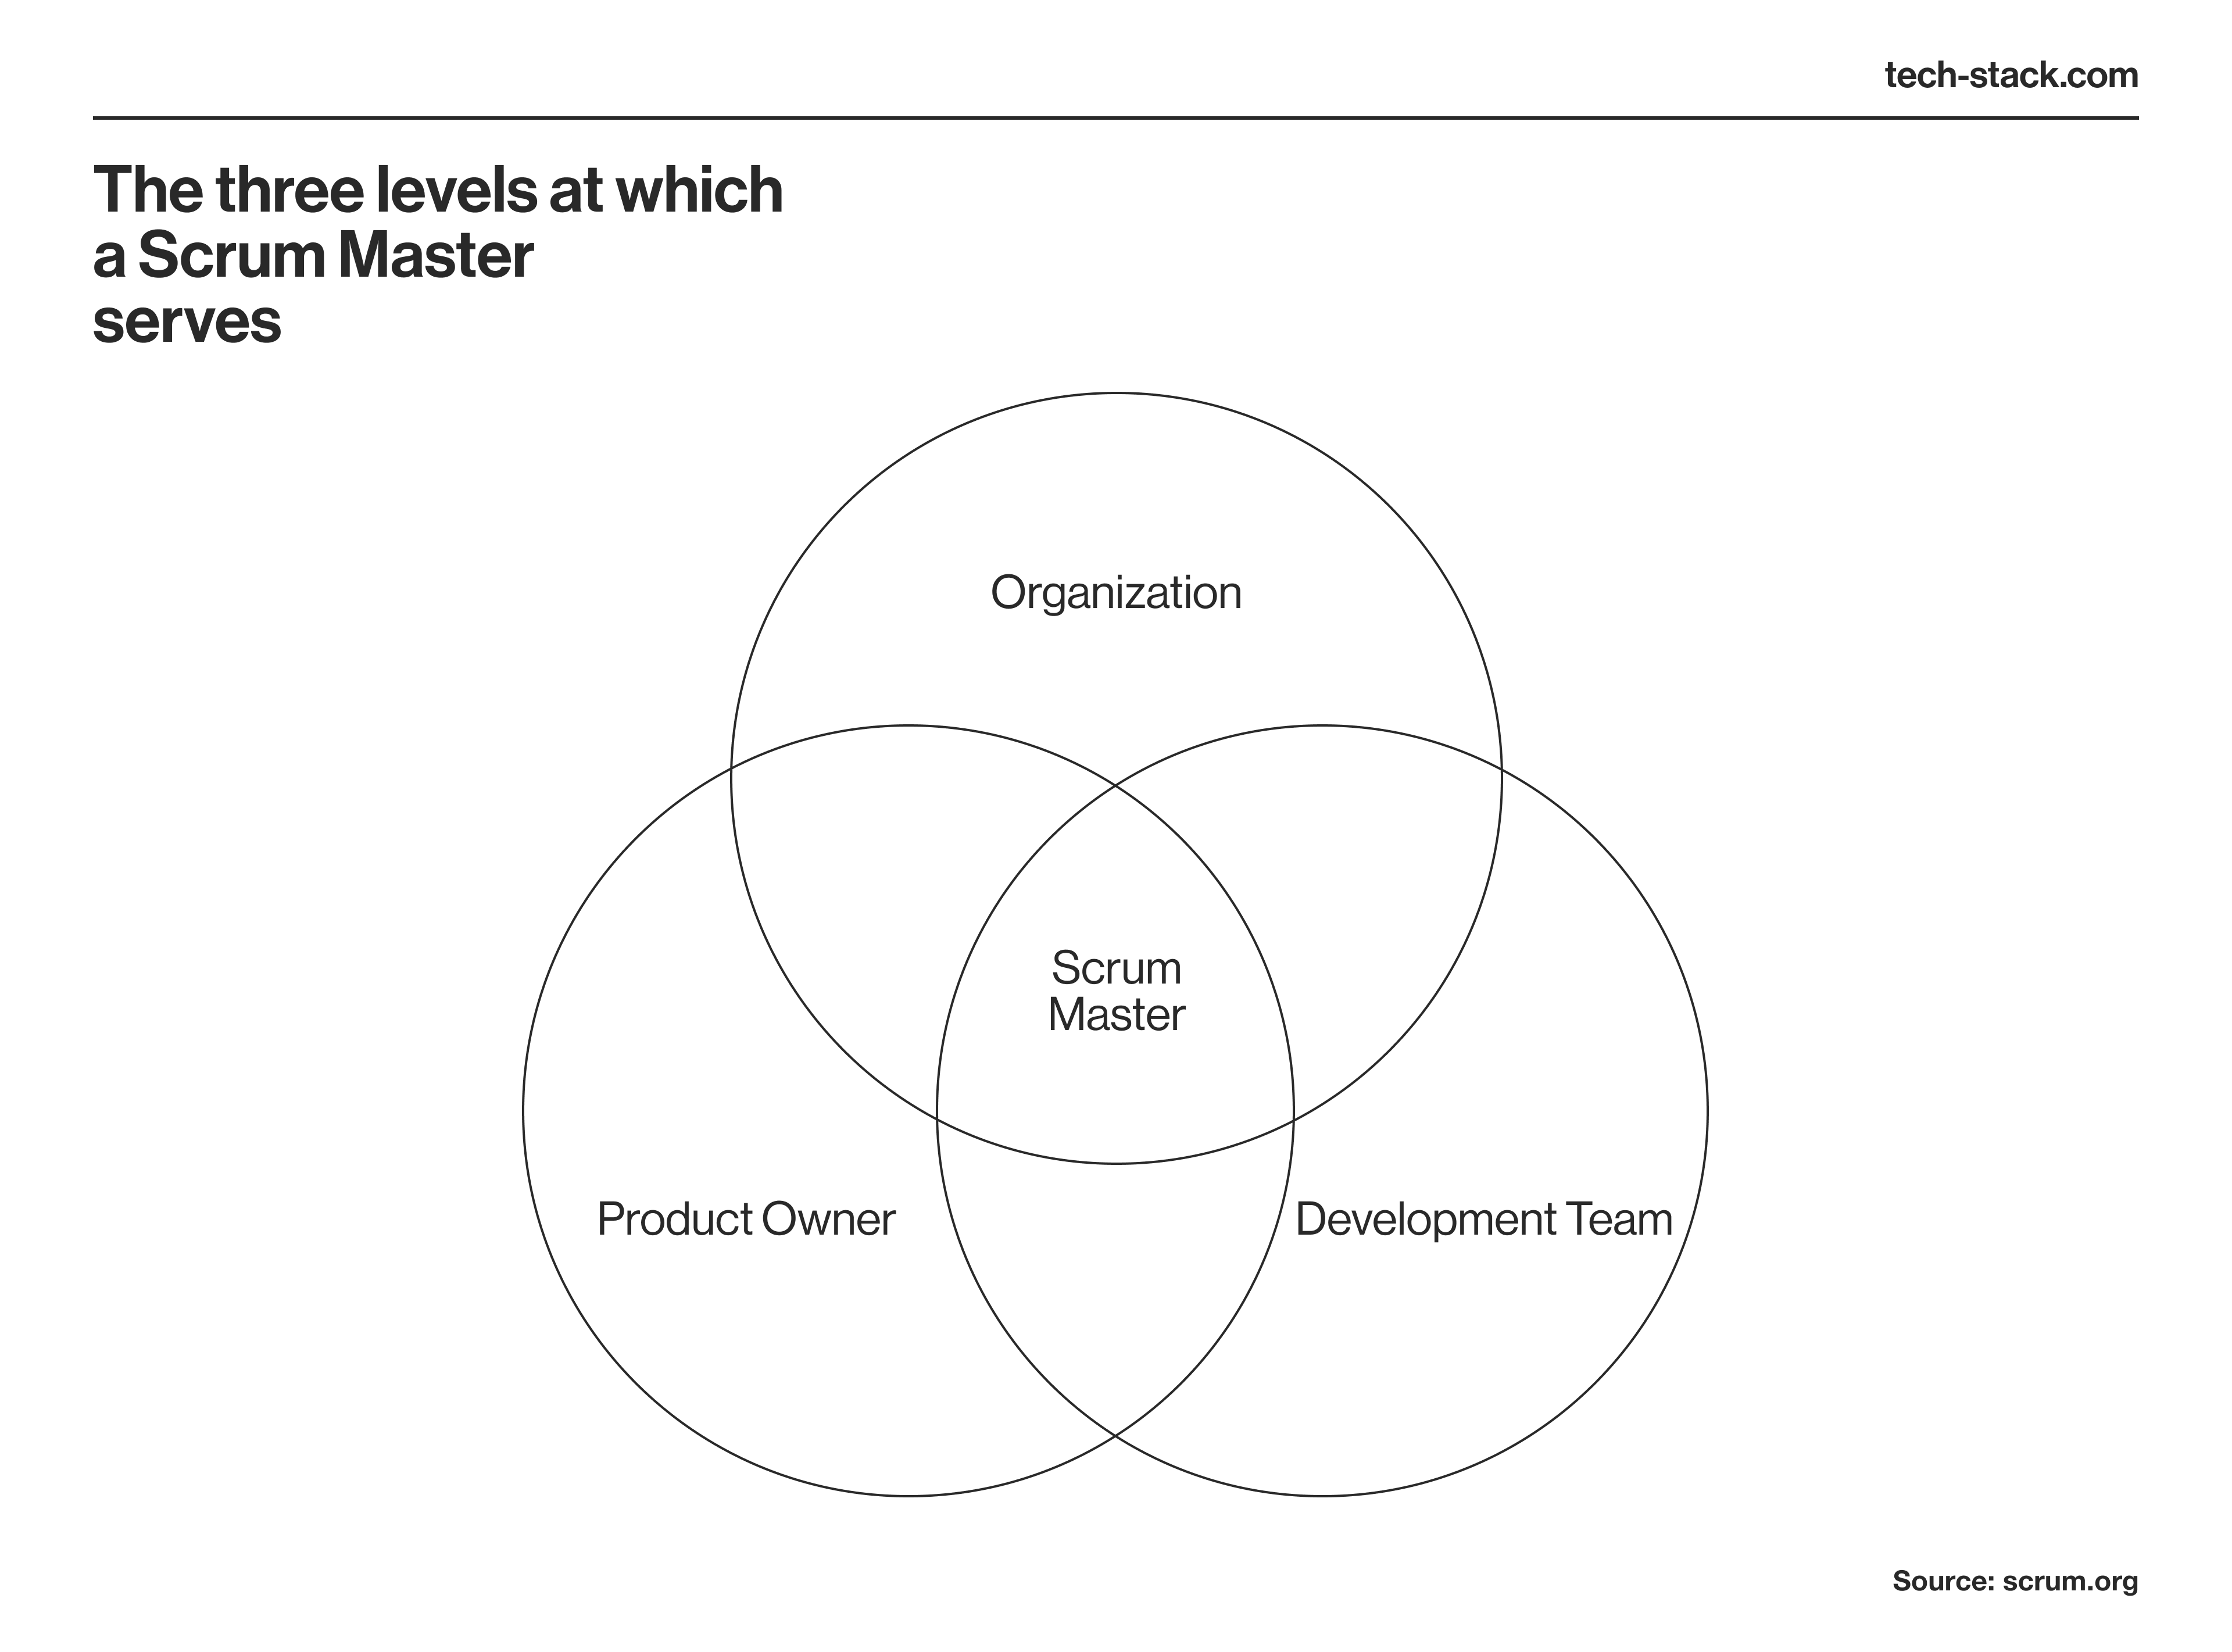 Levels at which a Scrum Master serves